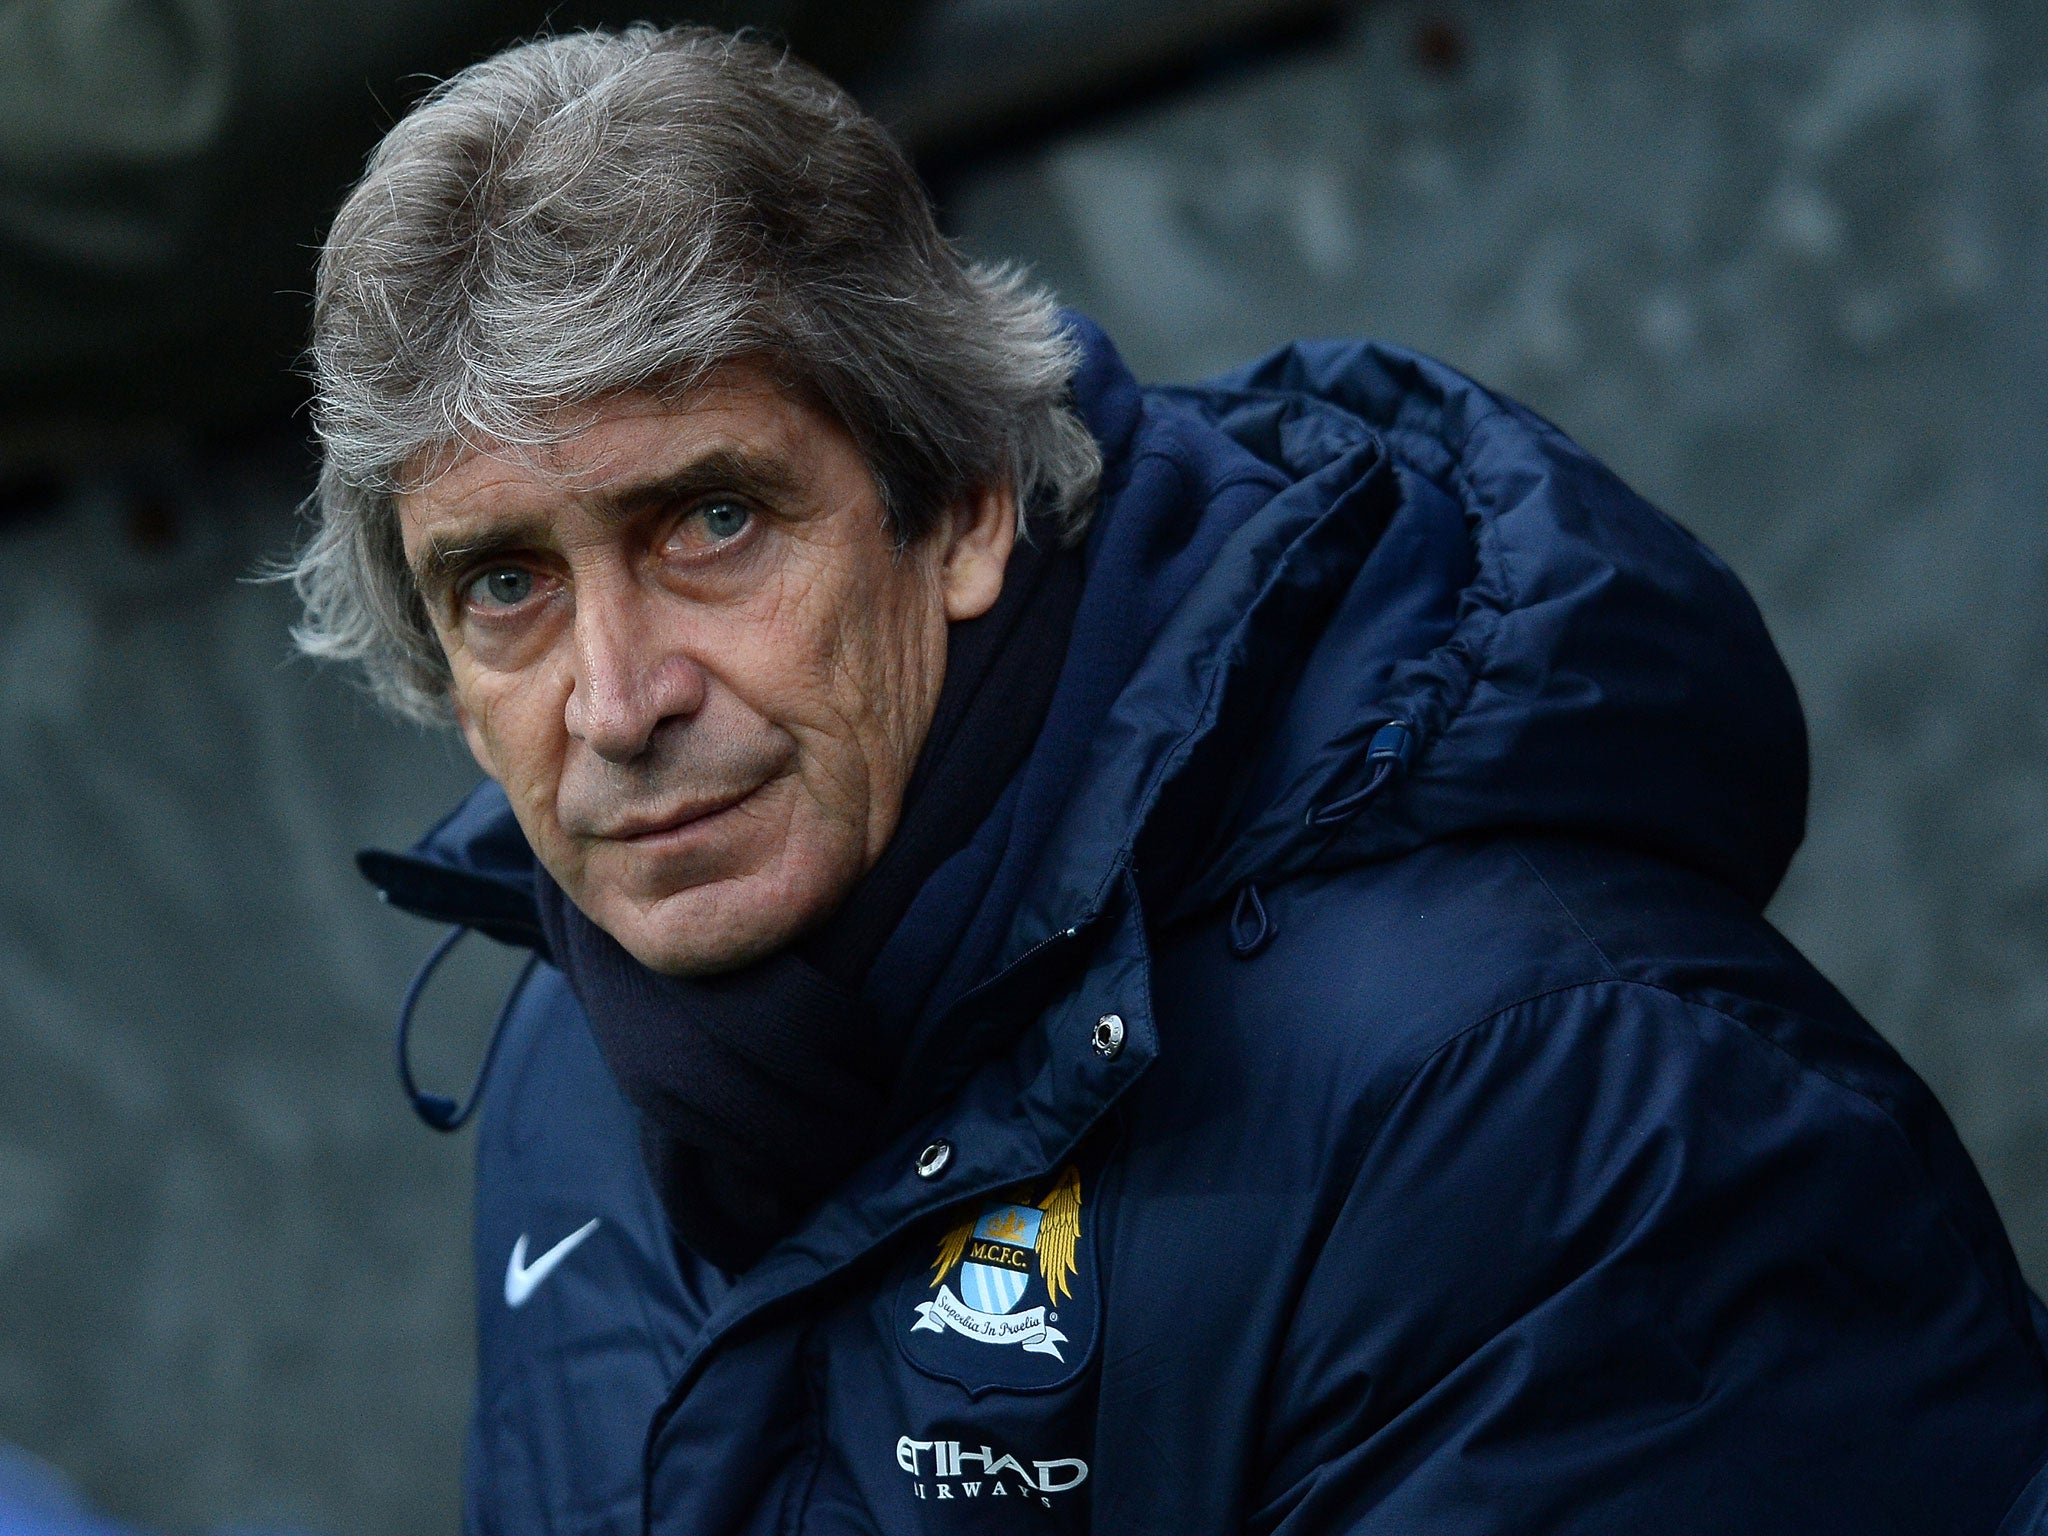 Manuel Pellegrini was pleased with his Manchester City side's performance in the 6-0 win over West Ham